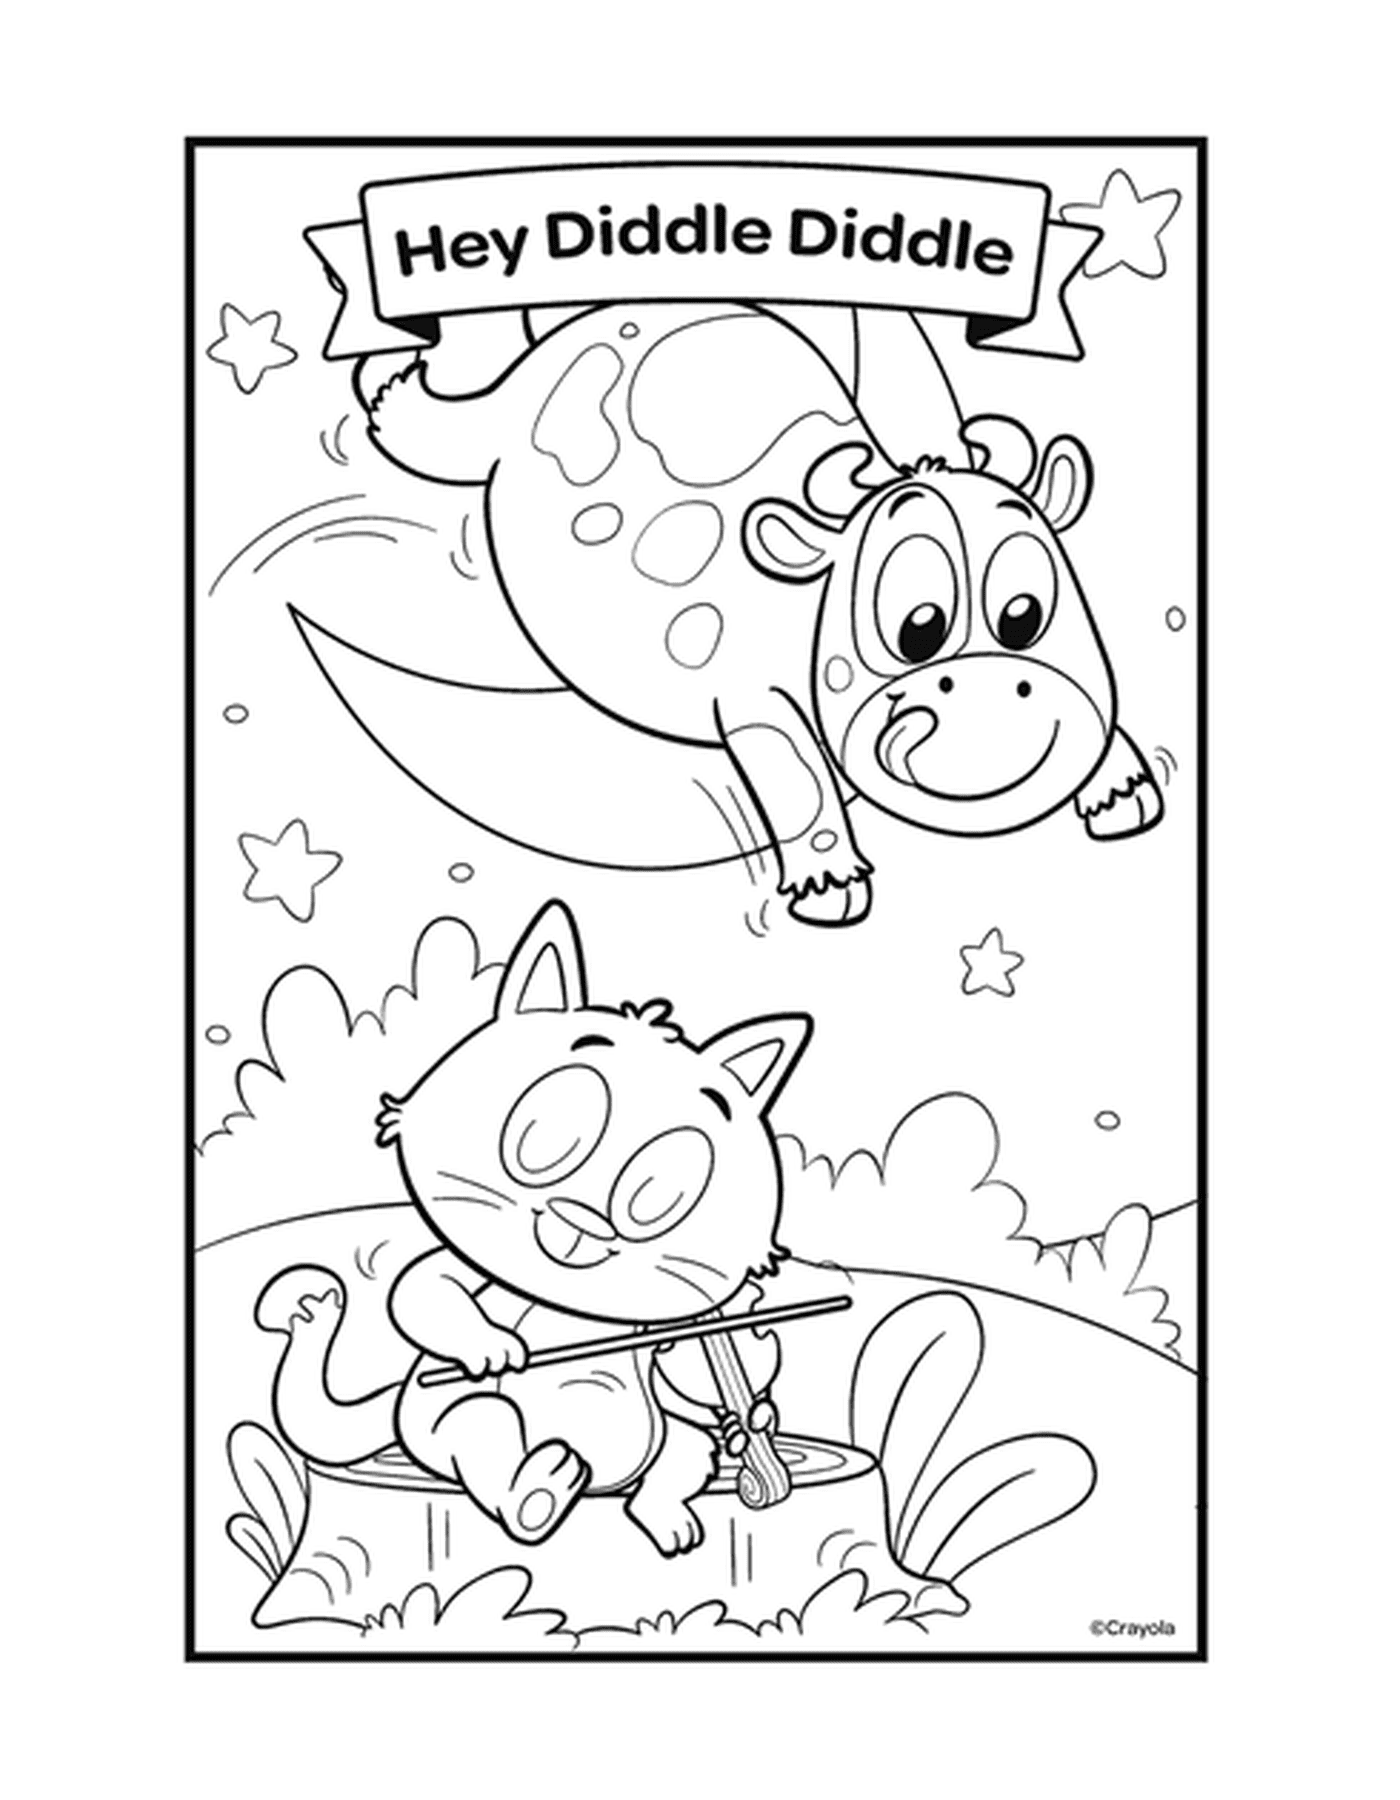 coloriage nursery rhymes hey diddle diddle